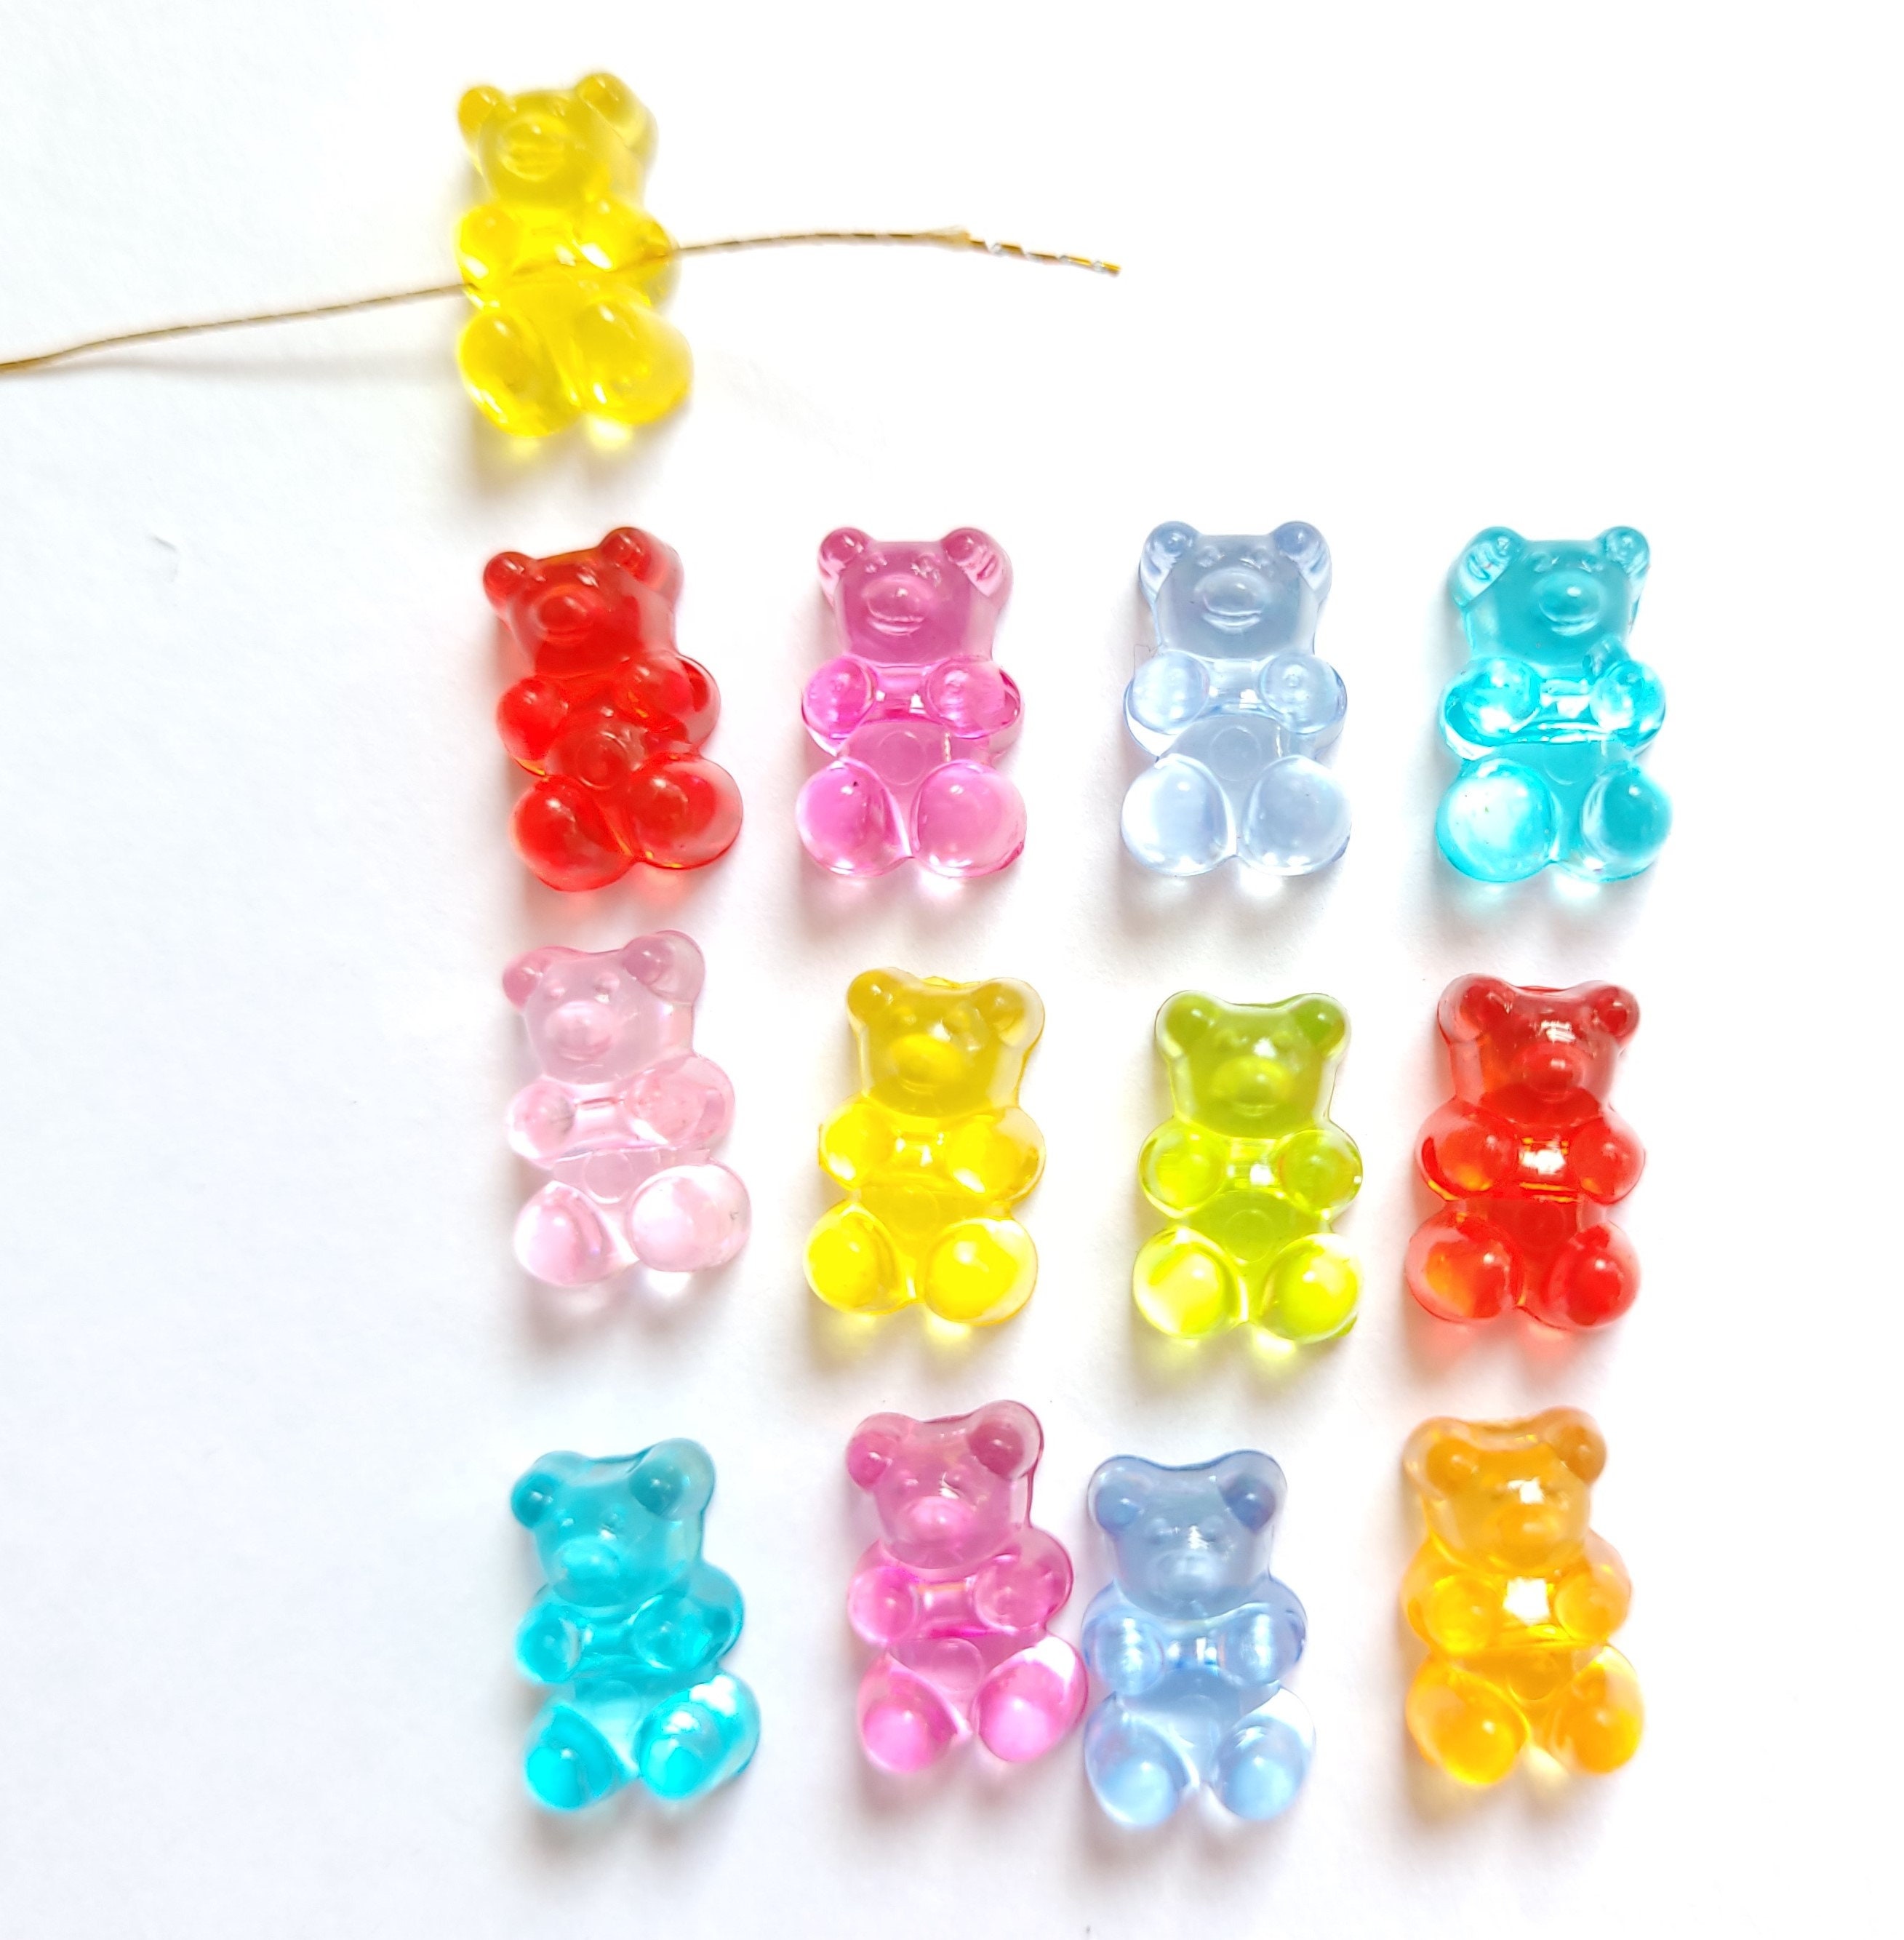 20pcs 21X11mm Candy Color Gummy Mini Bear Charms for Making Cute